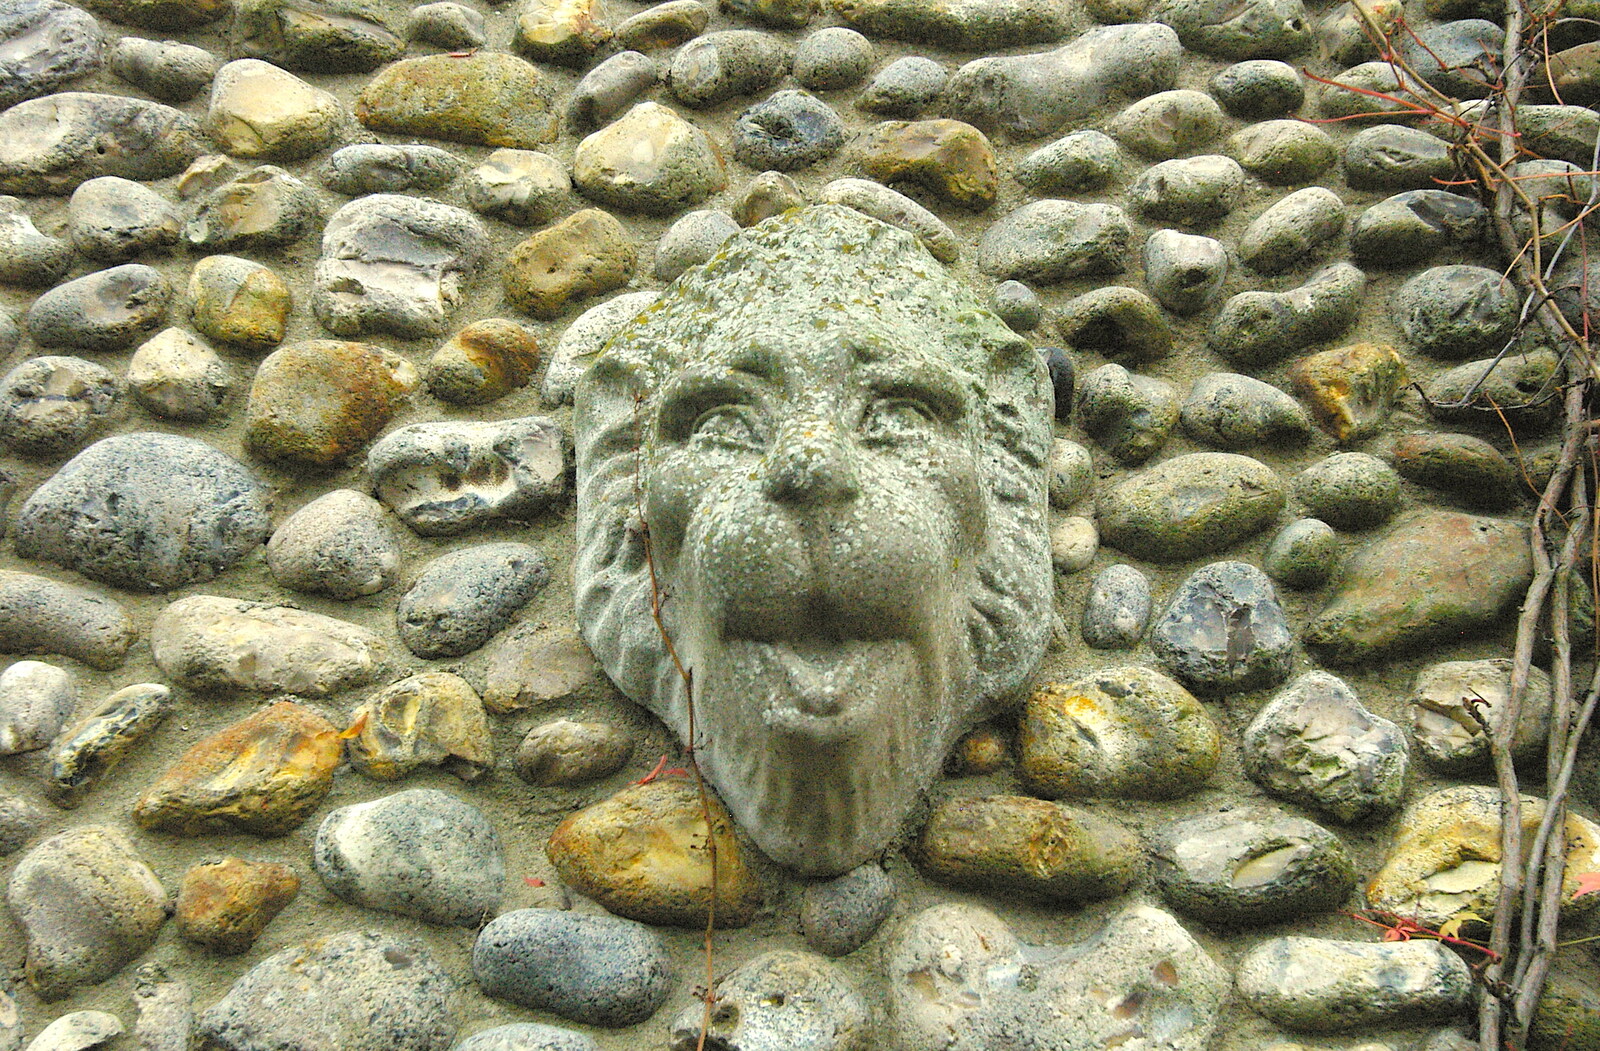 An interesting gargoyle in a flint wall  from Mother, Mike and the Stiffkey Light Shop, Cley and Holkham - 6th November 2005